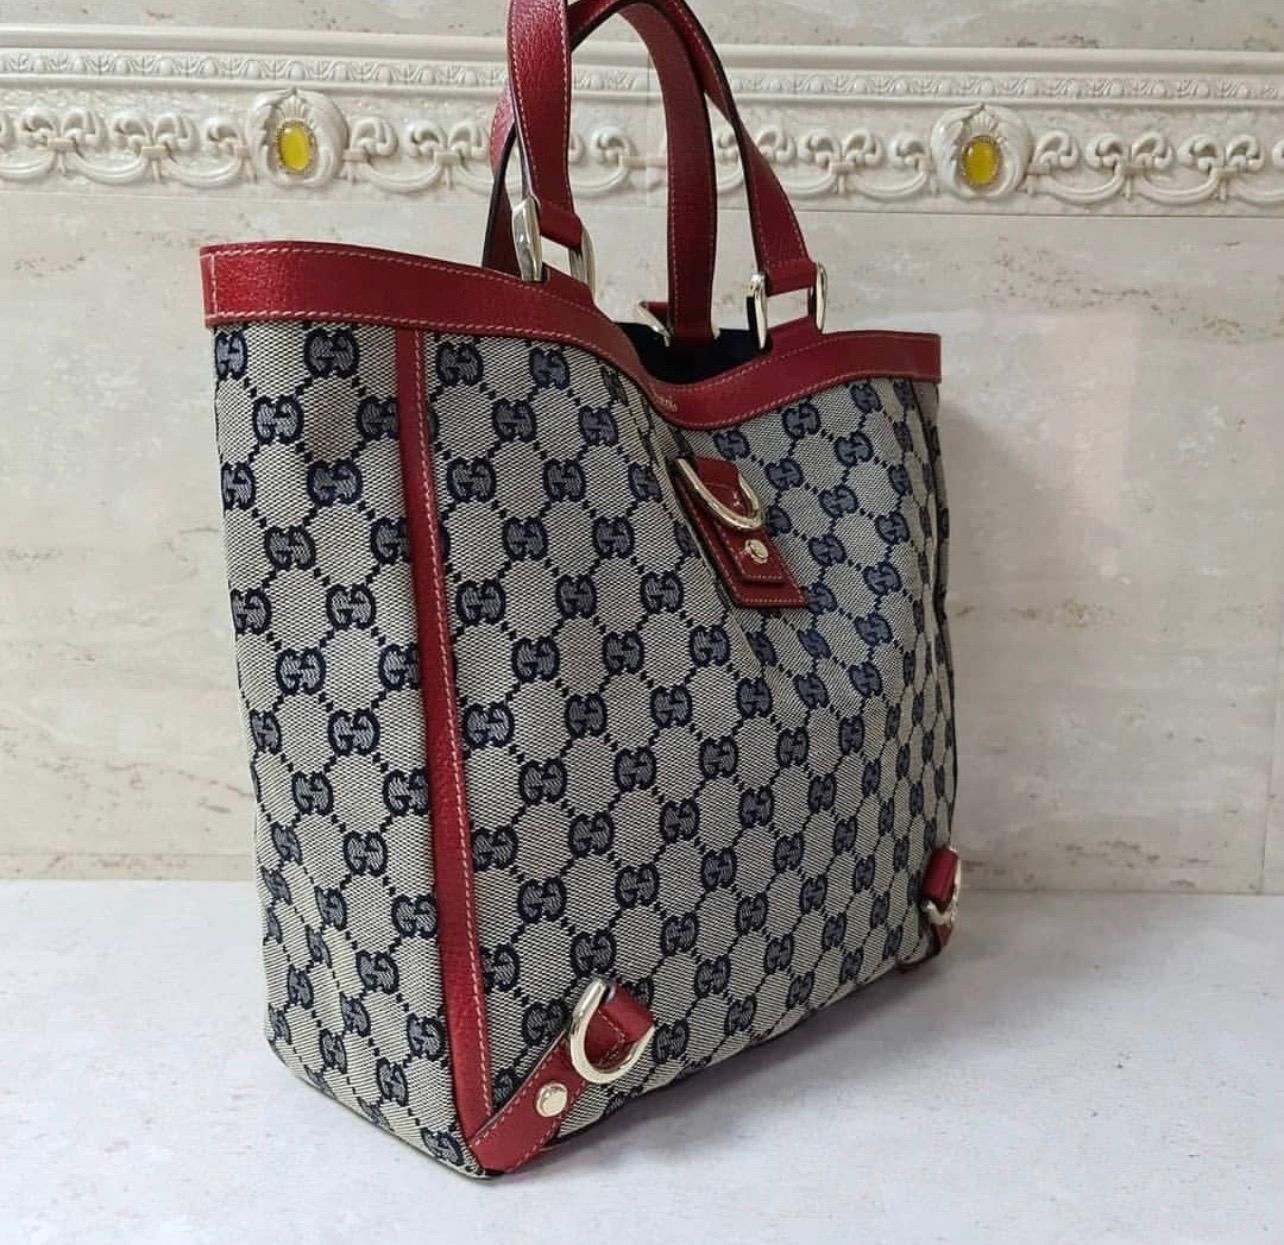 This is an authentic GUCCI Abbey D-Ring Tote.
 It's a sophisticated vintage Gucci tote for every day.
 It features a blue GG Monogram canvas with a red leather trim, short flat handles, gold-tone hardware, a d-rings on the front and back, and a